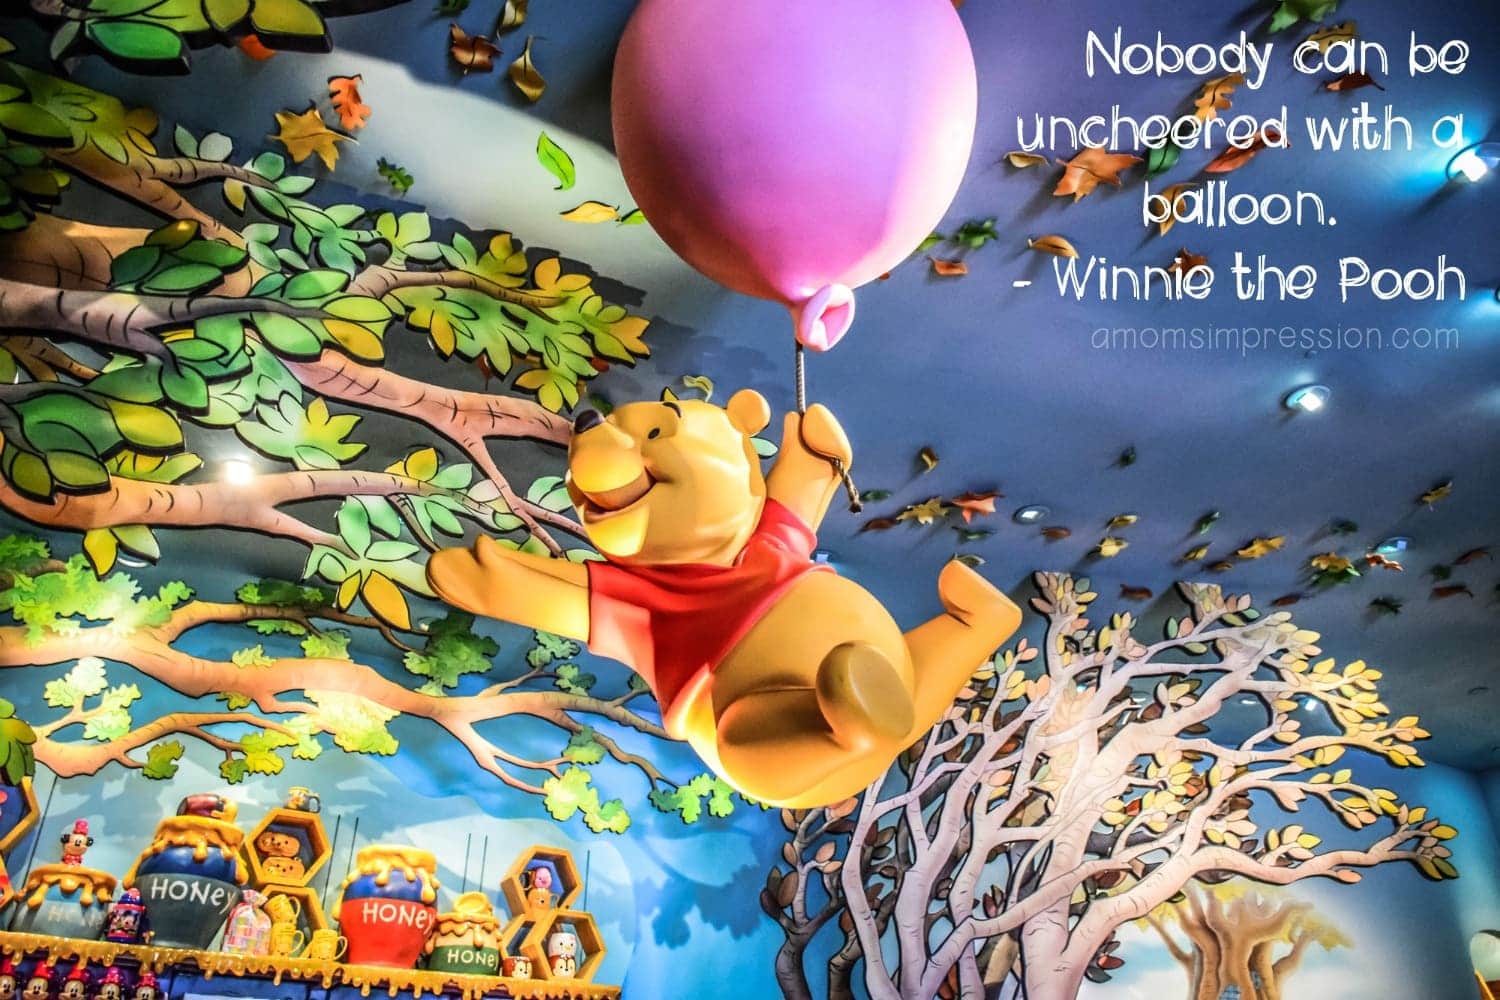 The Best Winnie the Pooh Quotes that Will Make You Smile